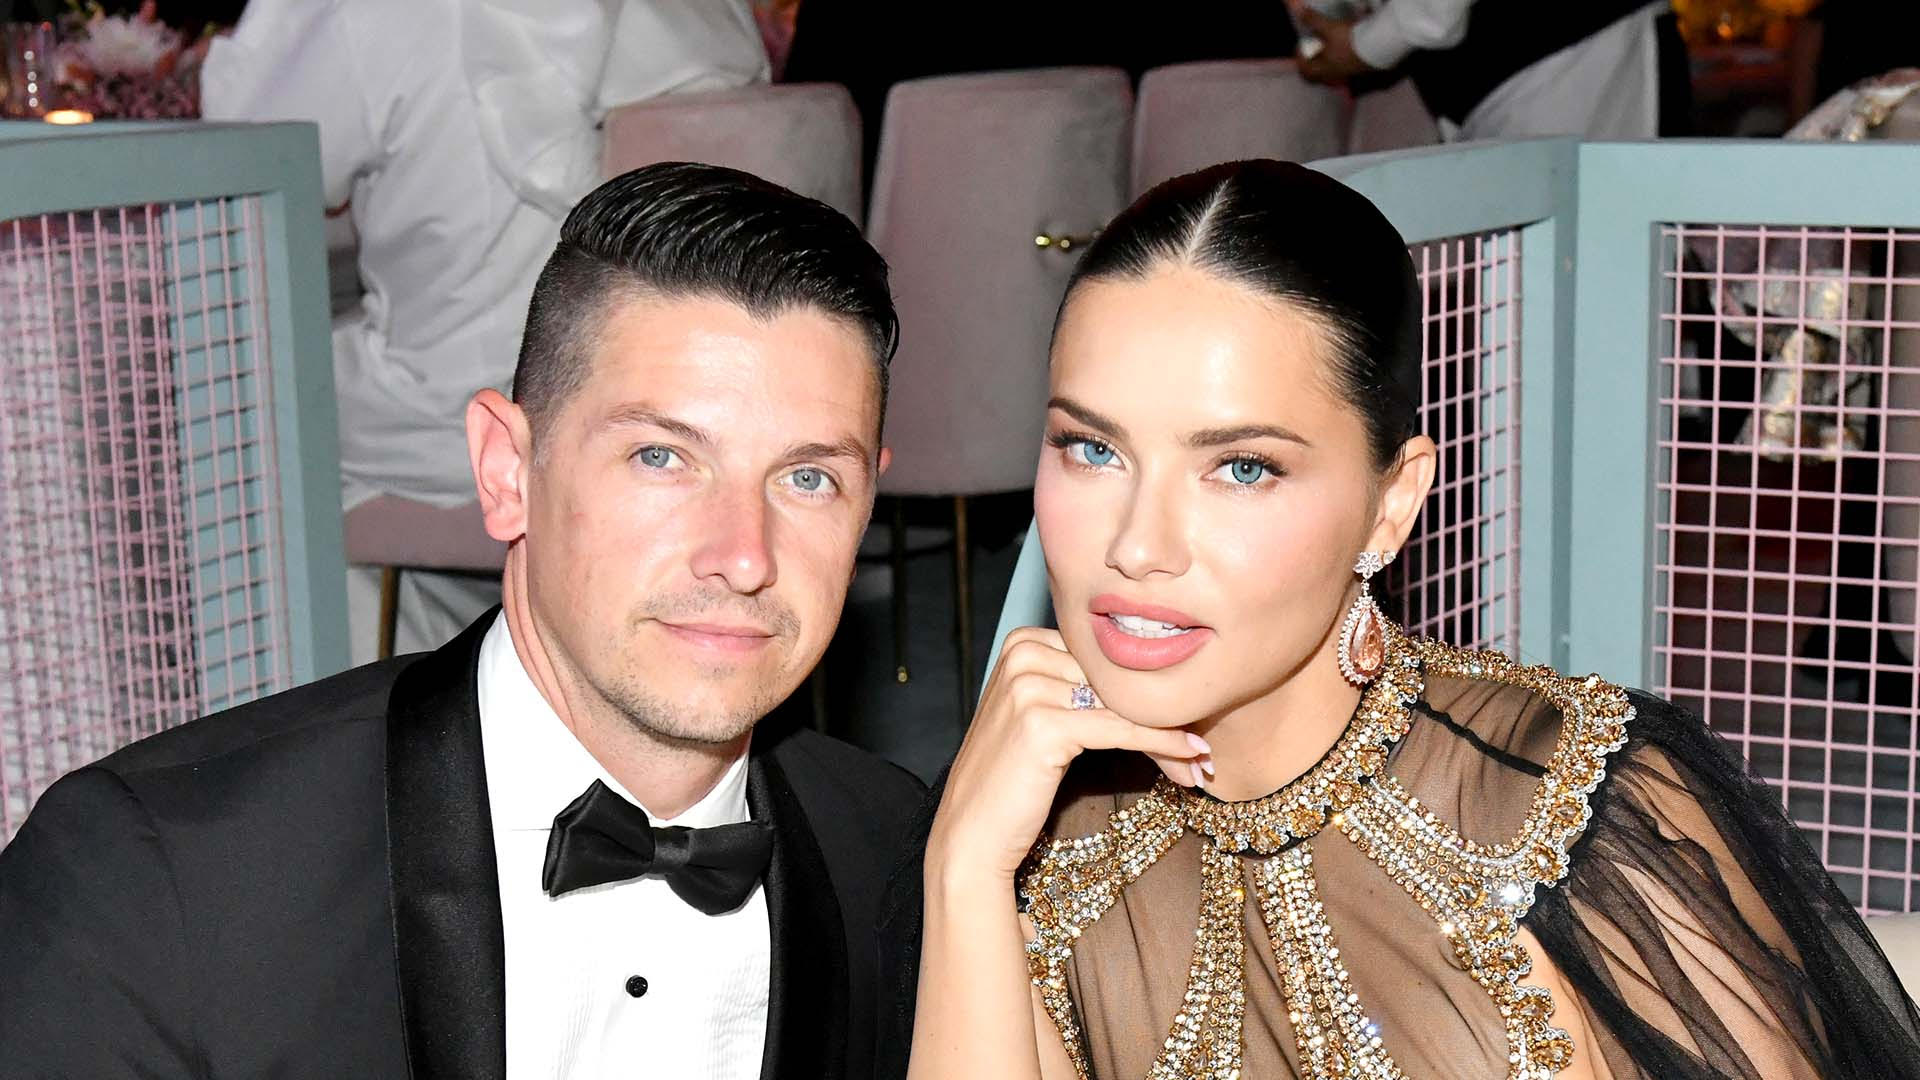 When did Adriana Lima have her baby? The US Sun